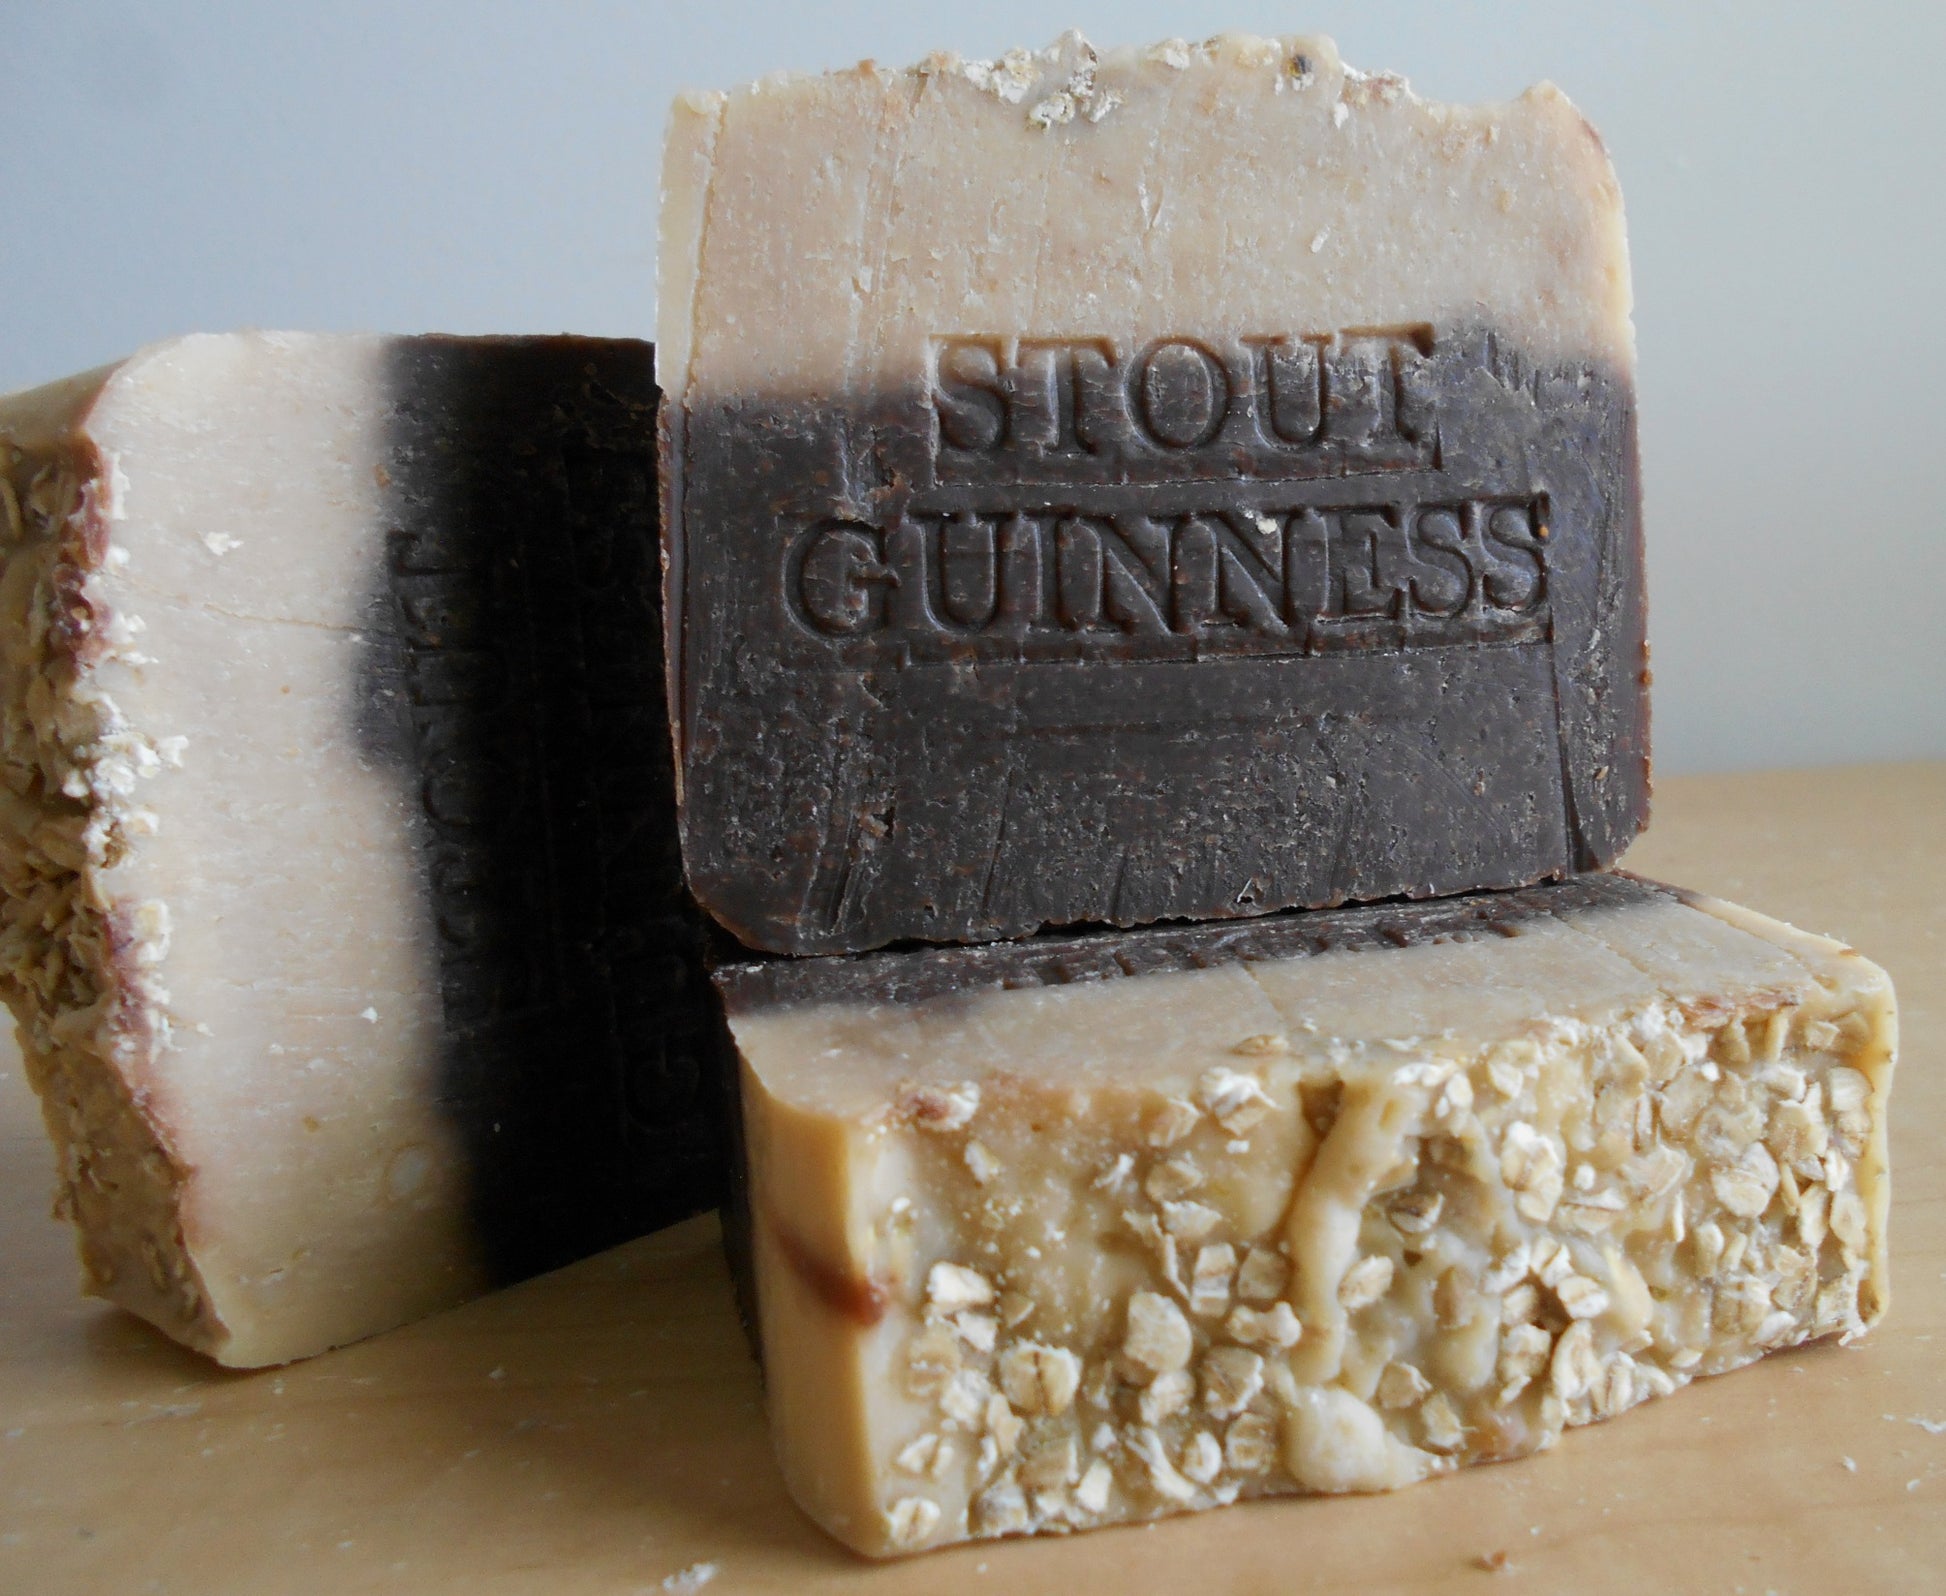 Guinness Extra Stout Handmade Soap - Beer Soap